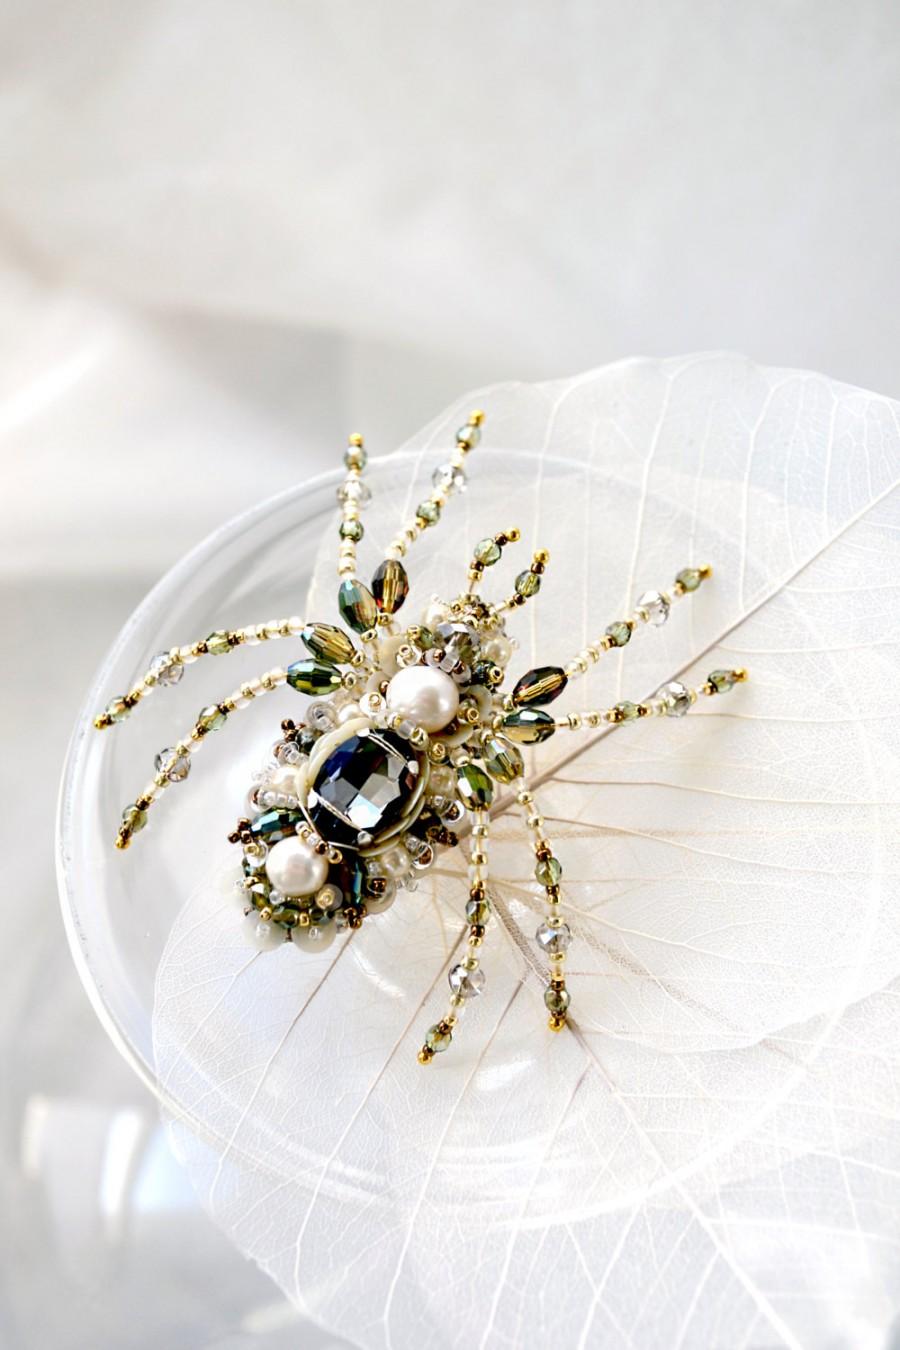 Свадьба - Spider jewelry Unique Statement jewelry Spider brooch beadwork Designer jewelry Luxury gift for wife Mothers day gift Birthday gift for her